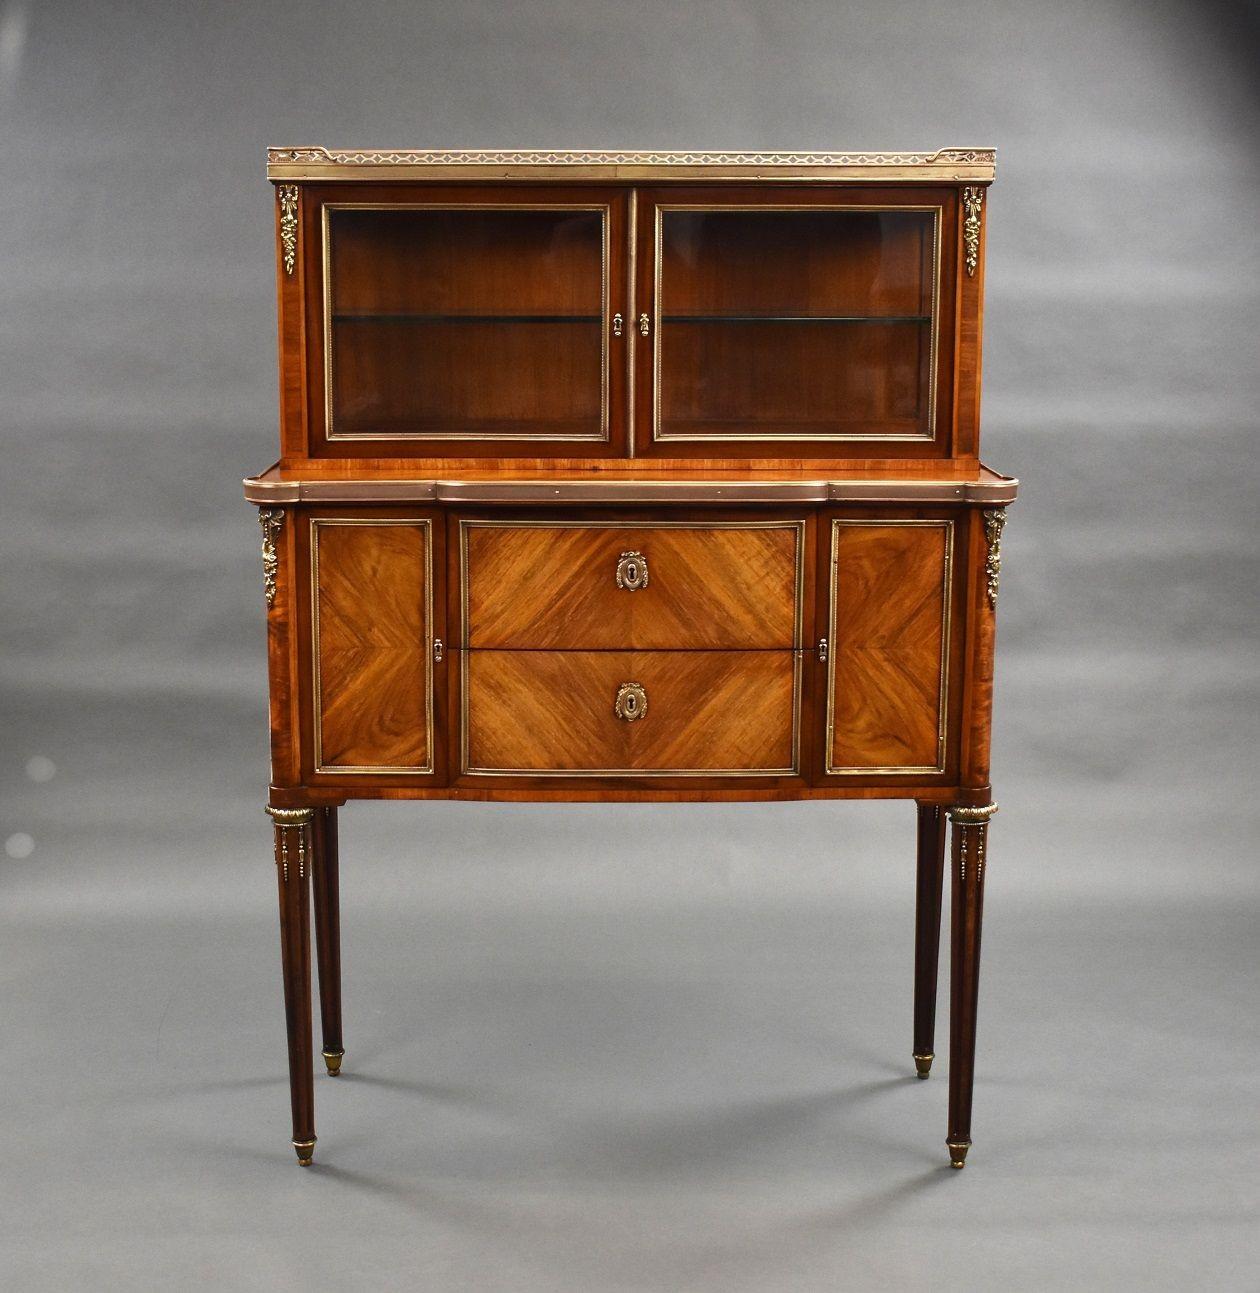 19th century French antique walnut glass top commode. The glass cabinet has a single glass shelf to the interior, the top of the cabinet is marble with a brass gallery to the edge with Ormolu brass mounts to each corner. Below the top has two small